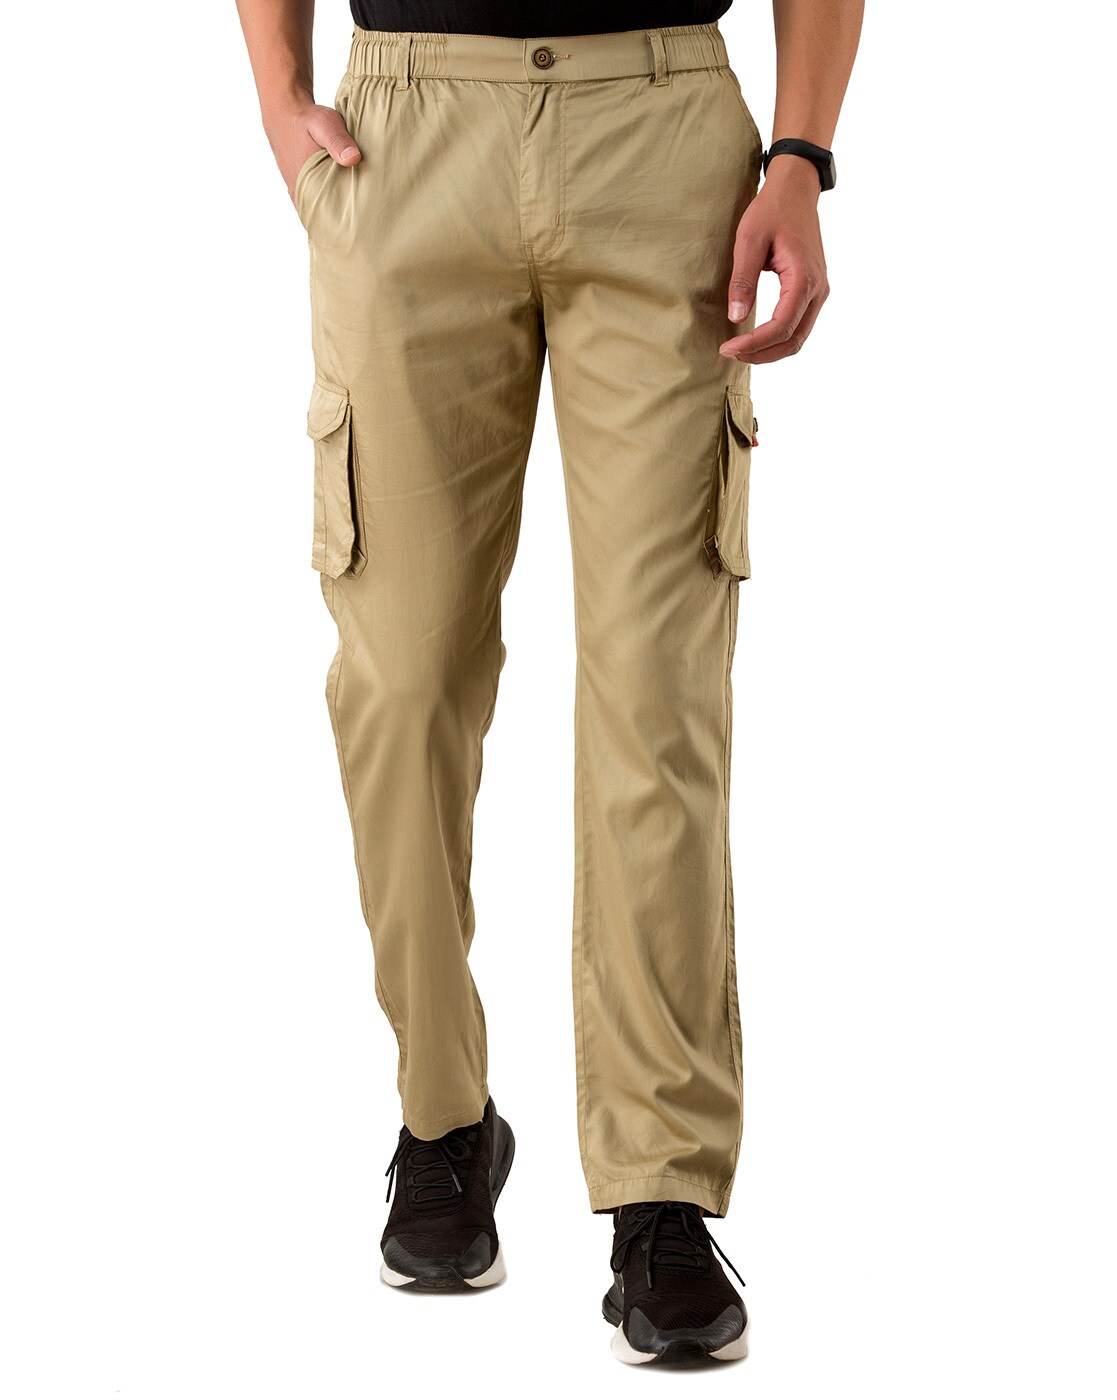 FALIZA Military Style Tactical Brown Cargo Pants Men For Men Multi Pockets,  Straight Style, Plus Size Cotton Outwear PA49 201128 From Cong04, $27.15 |  DHgate.Com